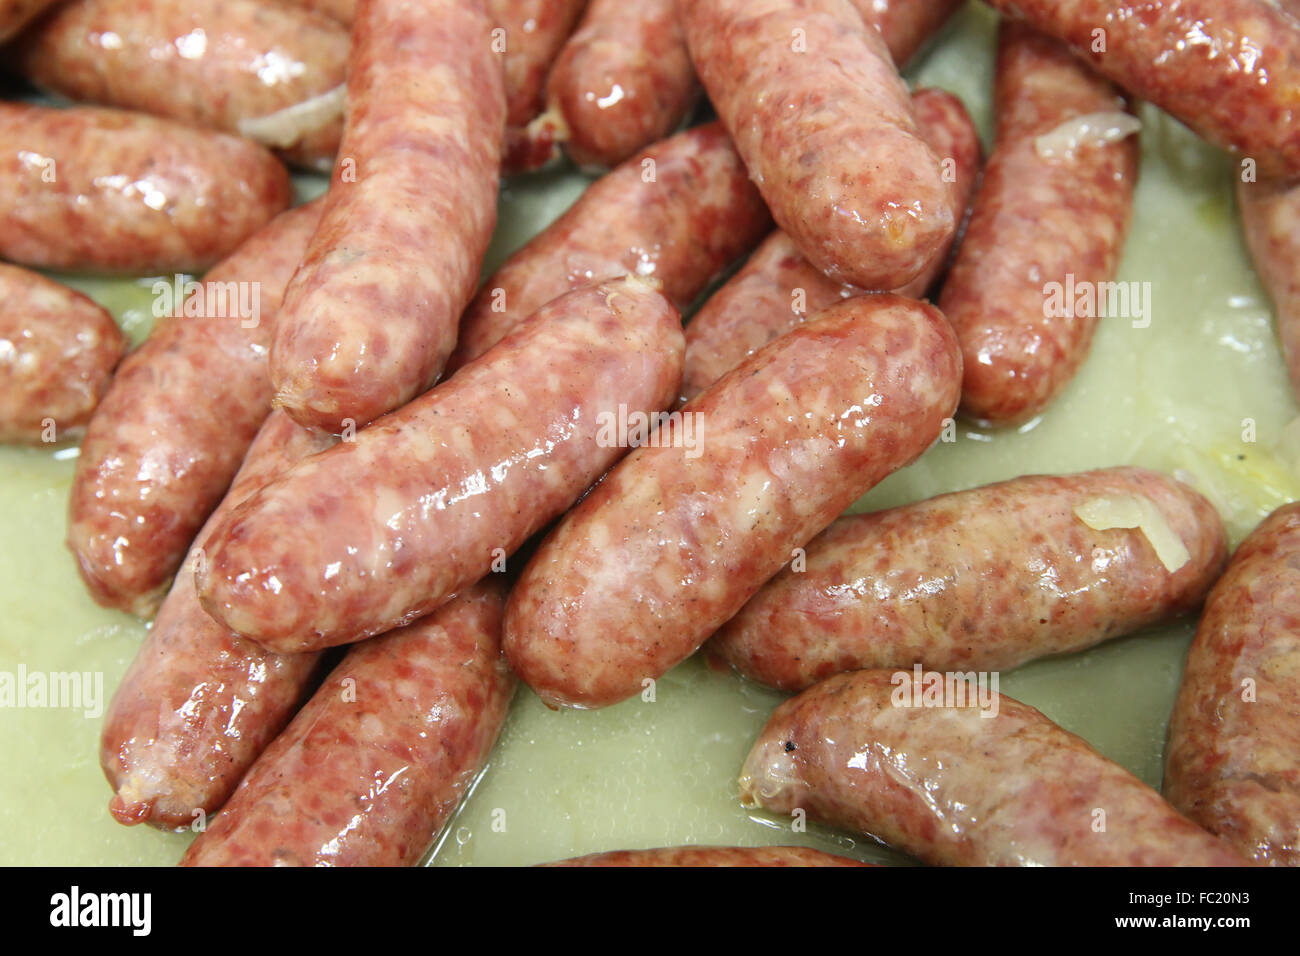 Diots. A diot is a sausage from the French region of Savoy. Stock Photo